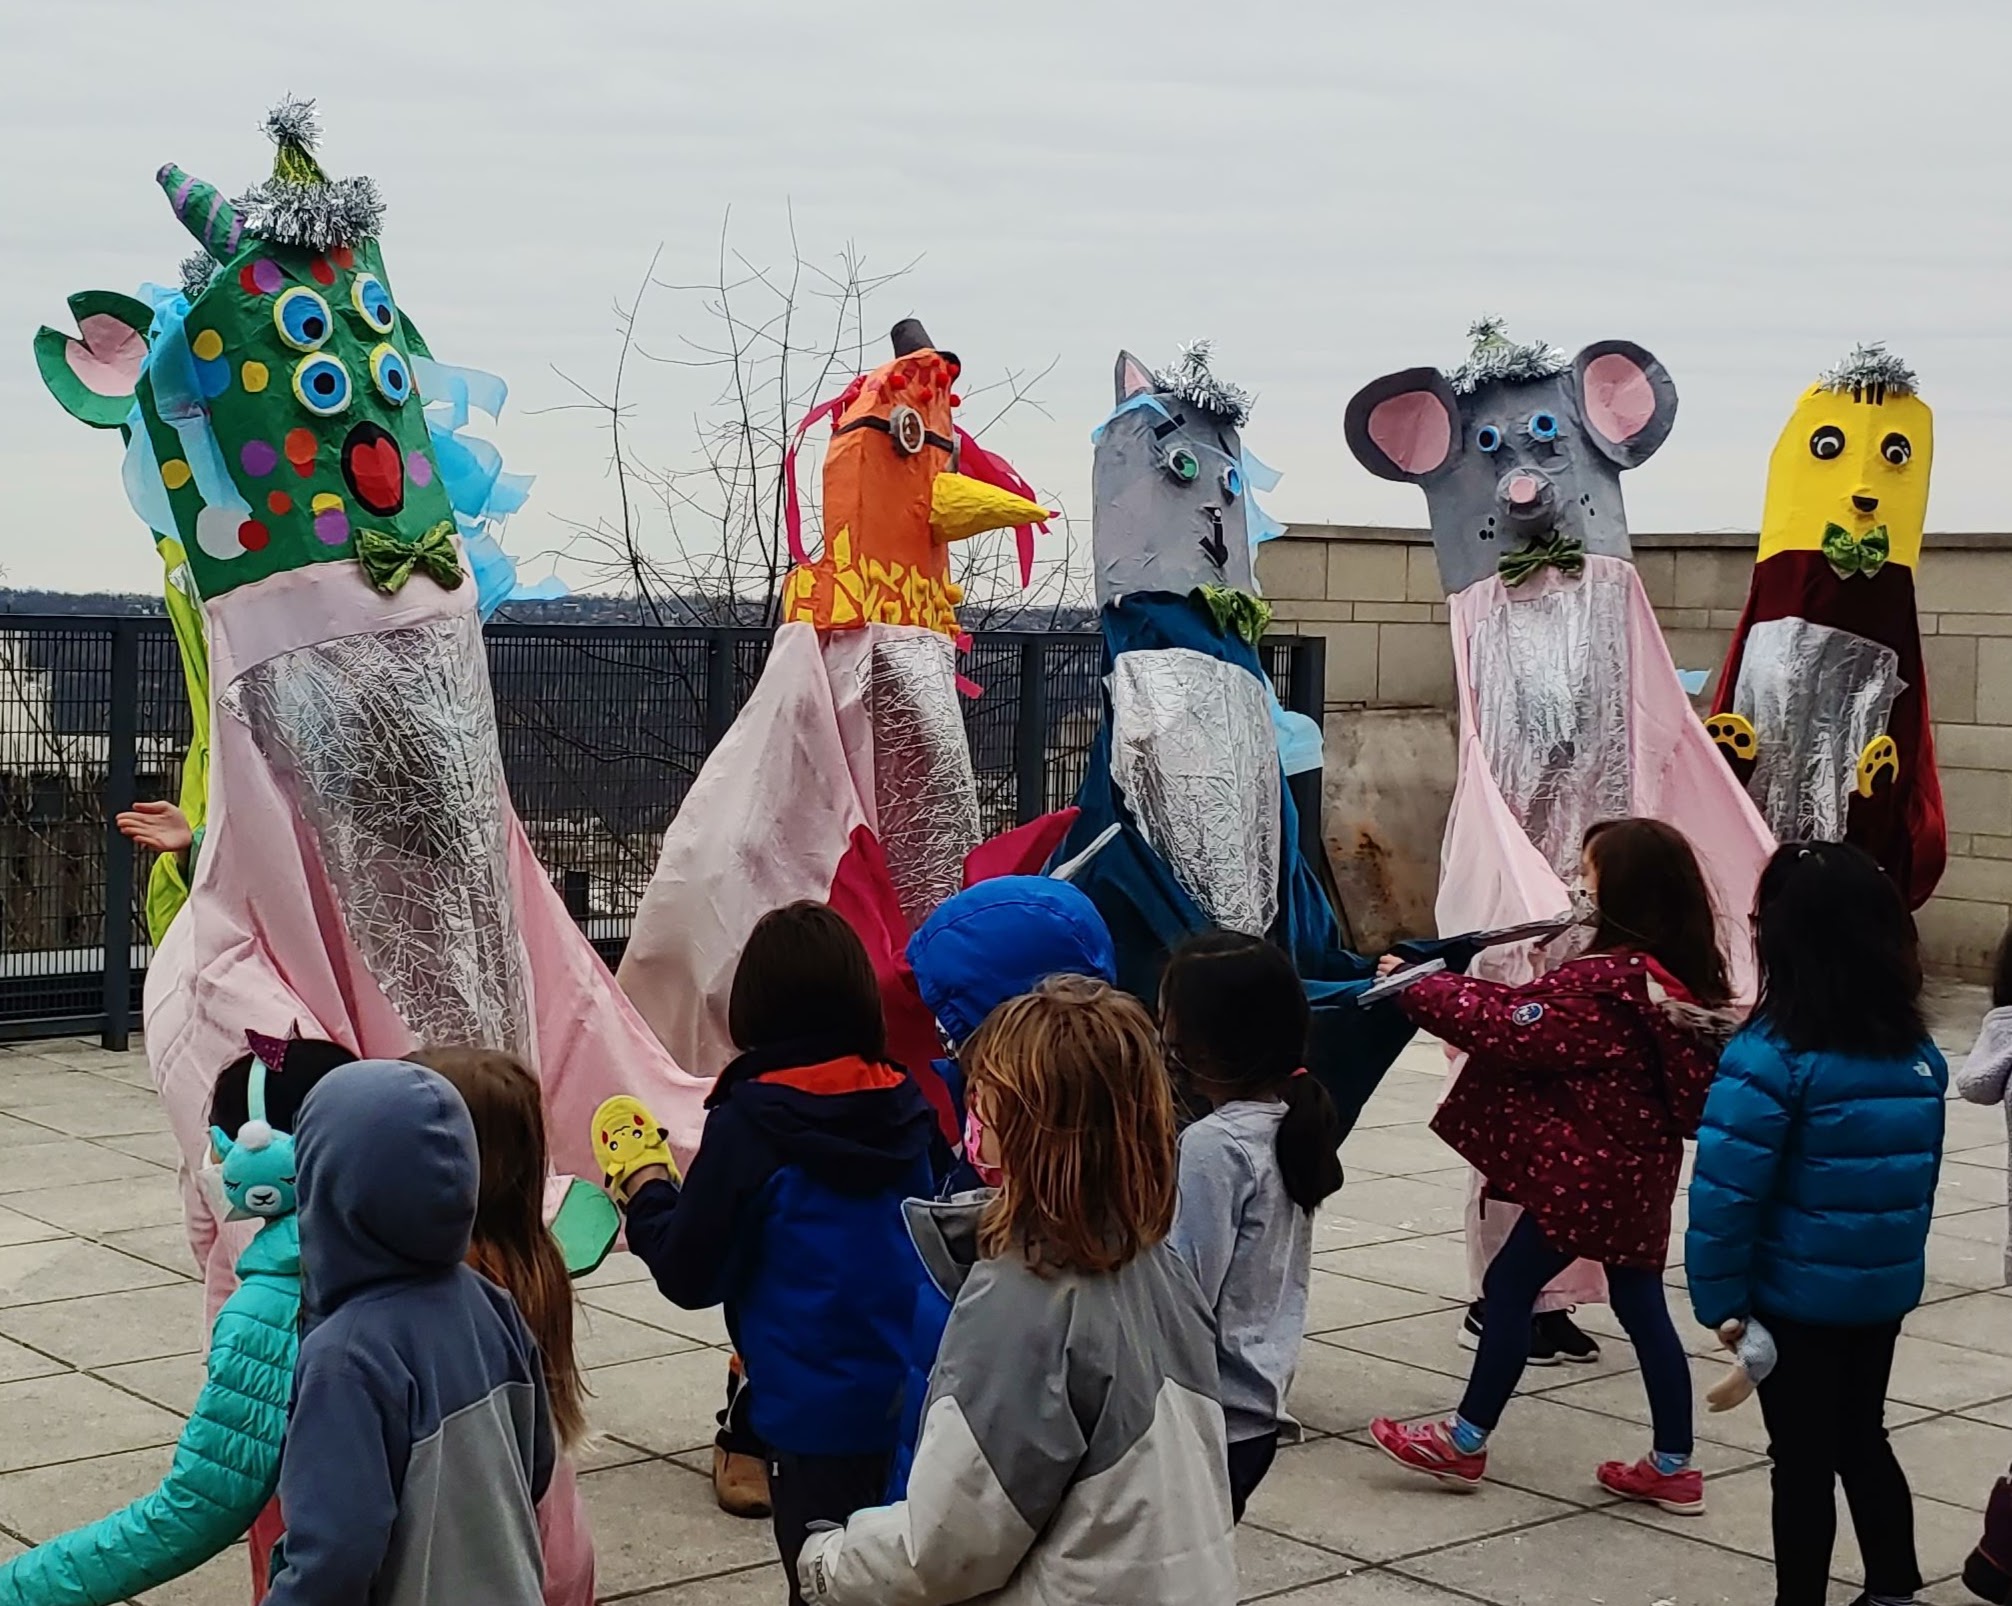 Giant puppets interact with little kids